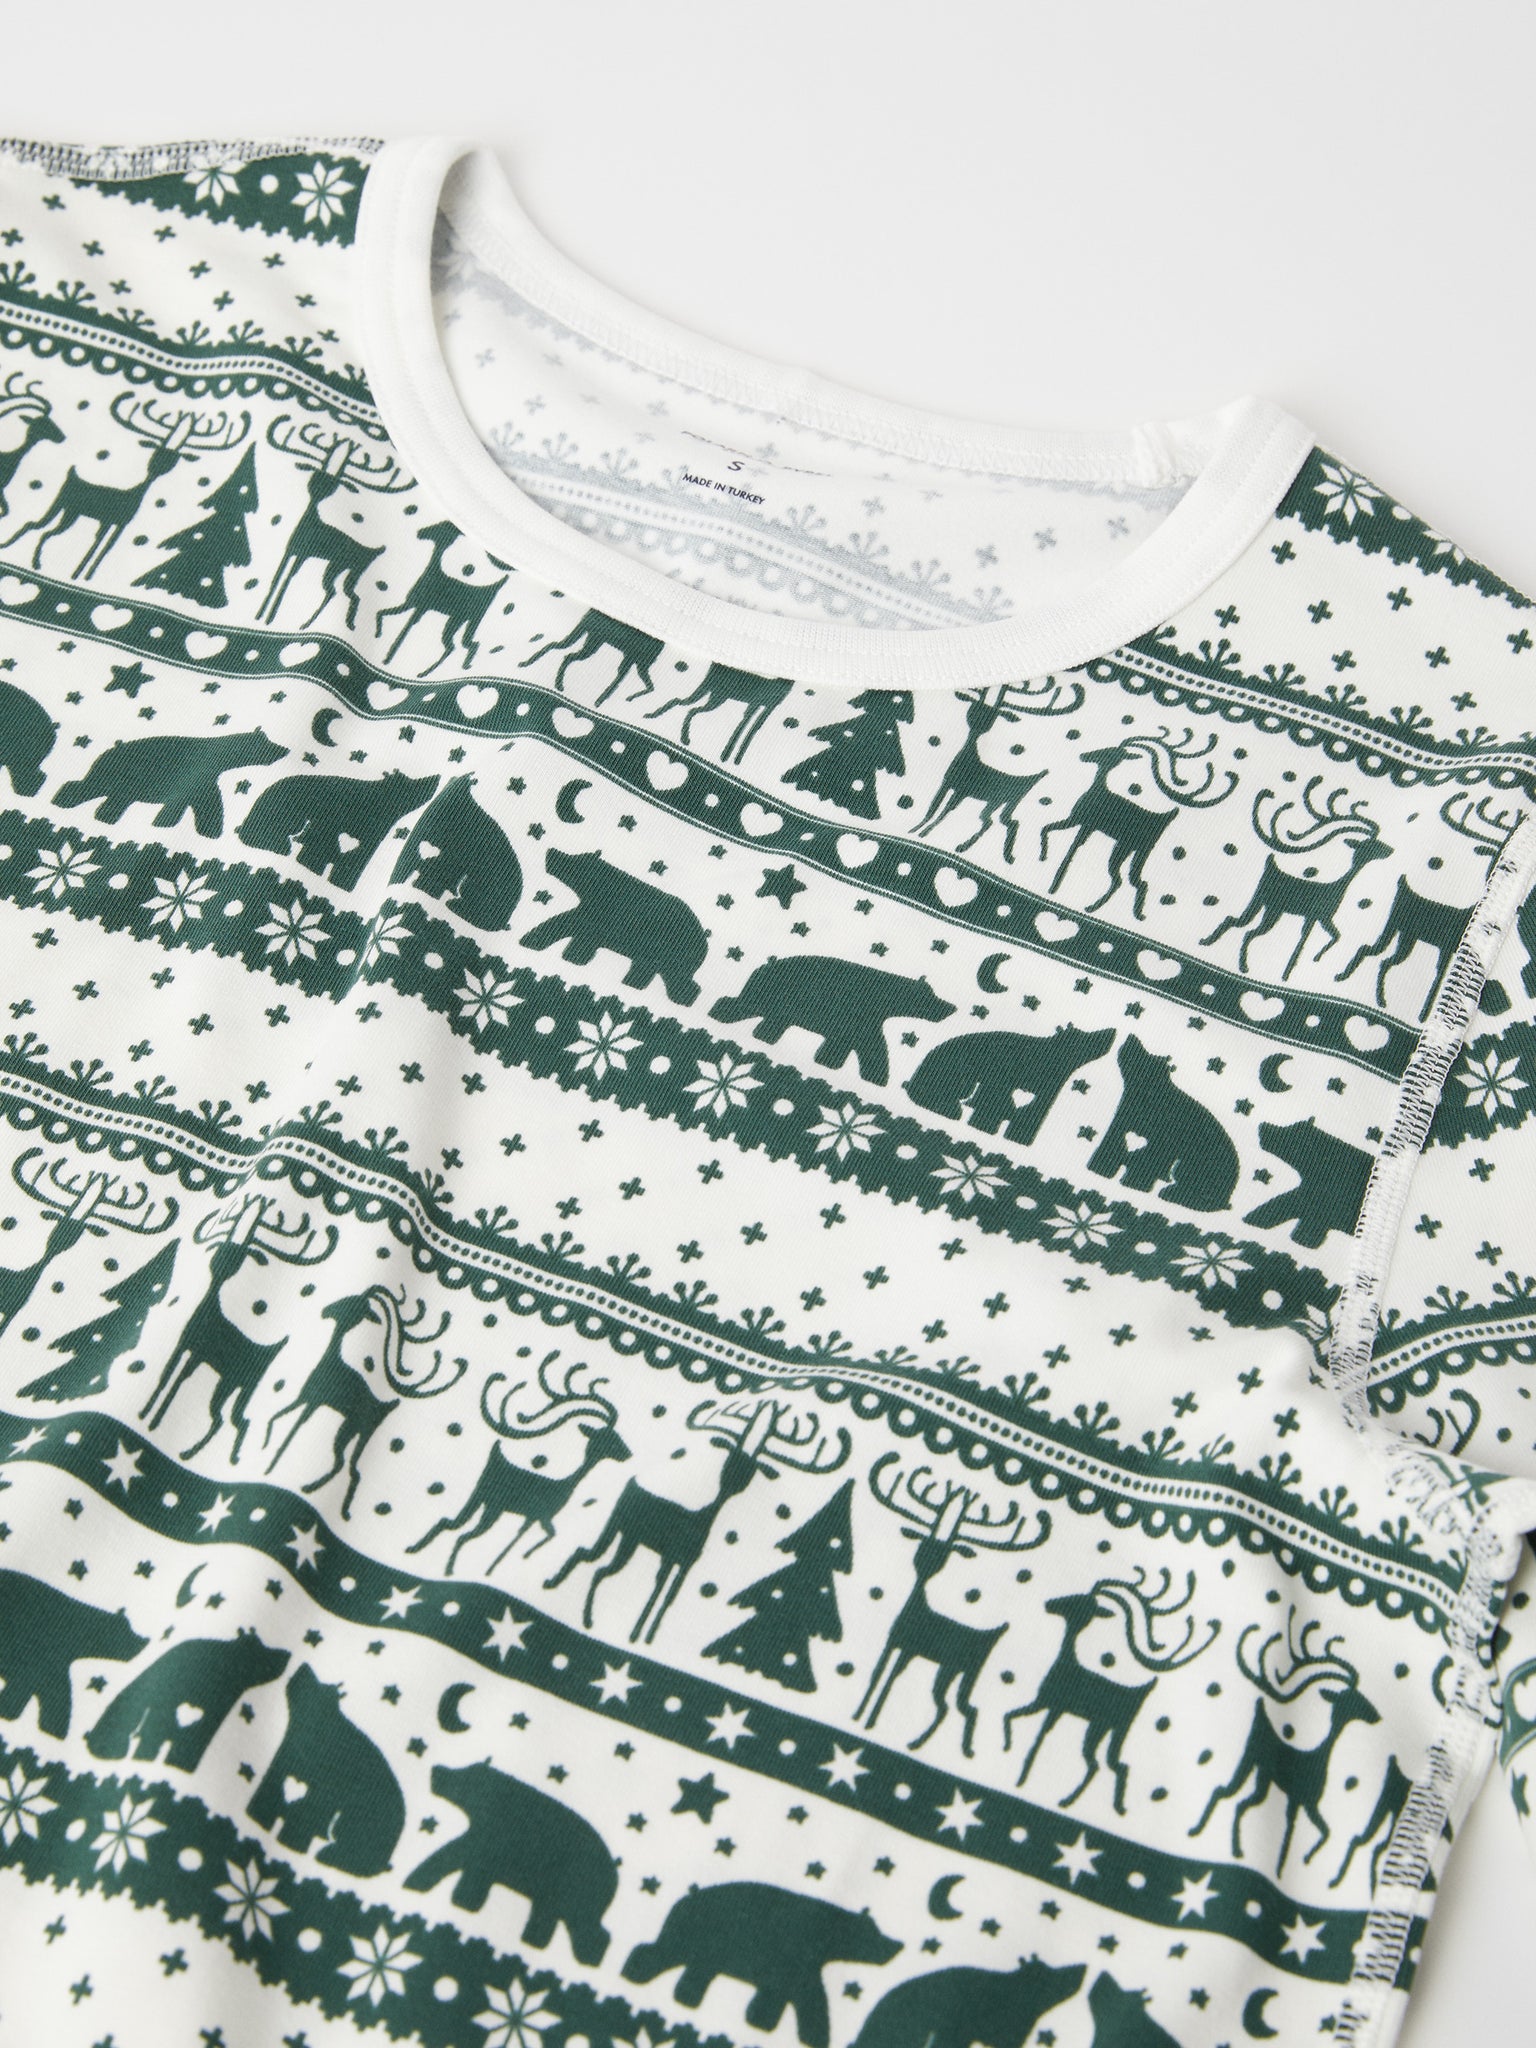 Christmas Print Cotton Adult Pyjamas from the Polarn O. Pyret adult collection. Clothes made using sustainably sourced materials.